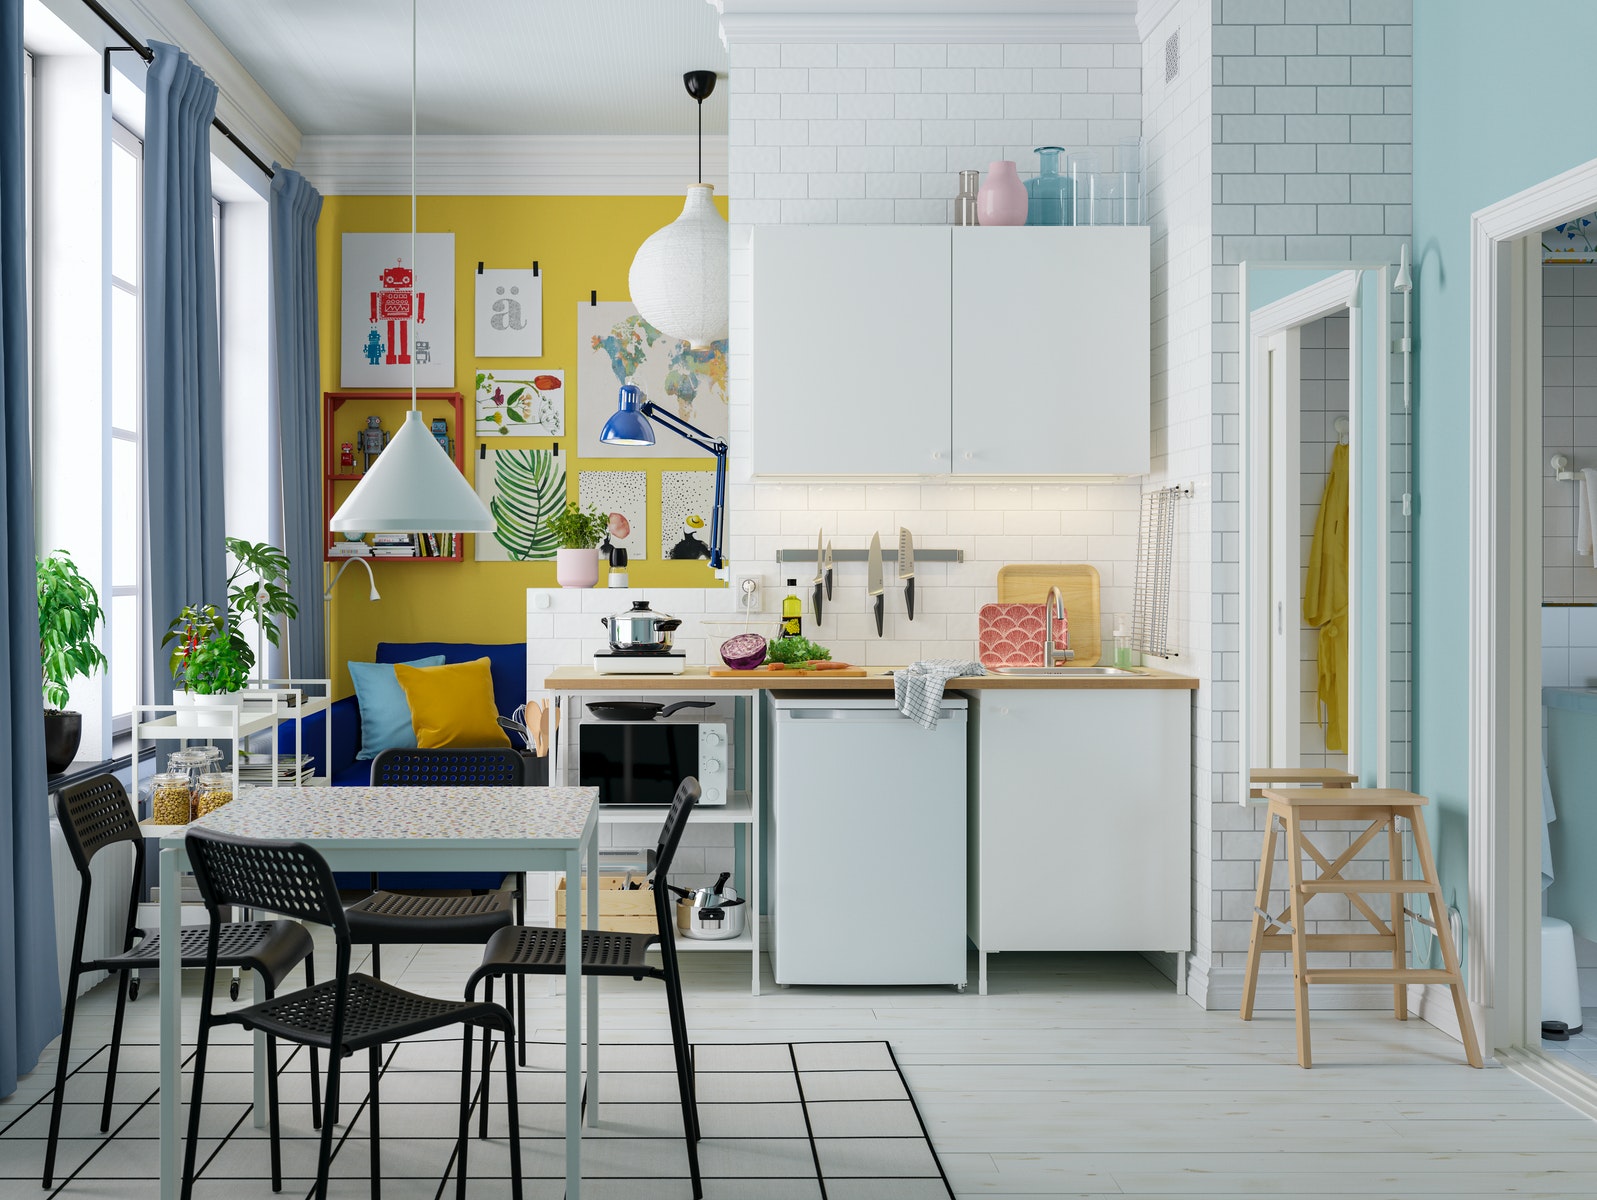 IKEA - A small multipurpose kitchen that’s easy to put together